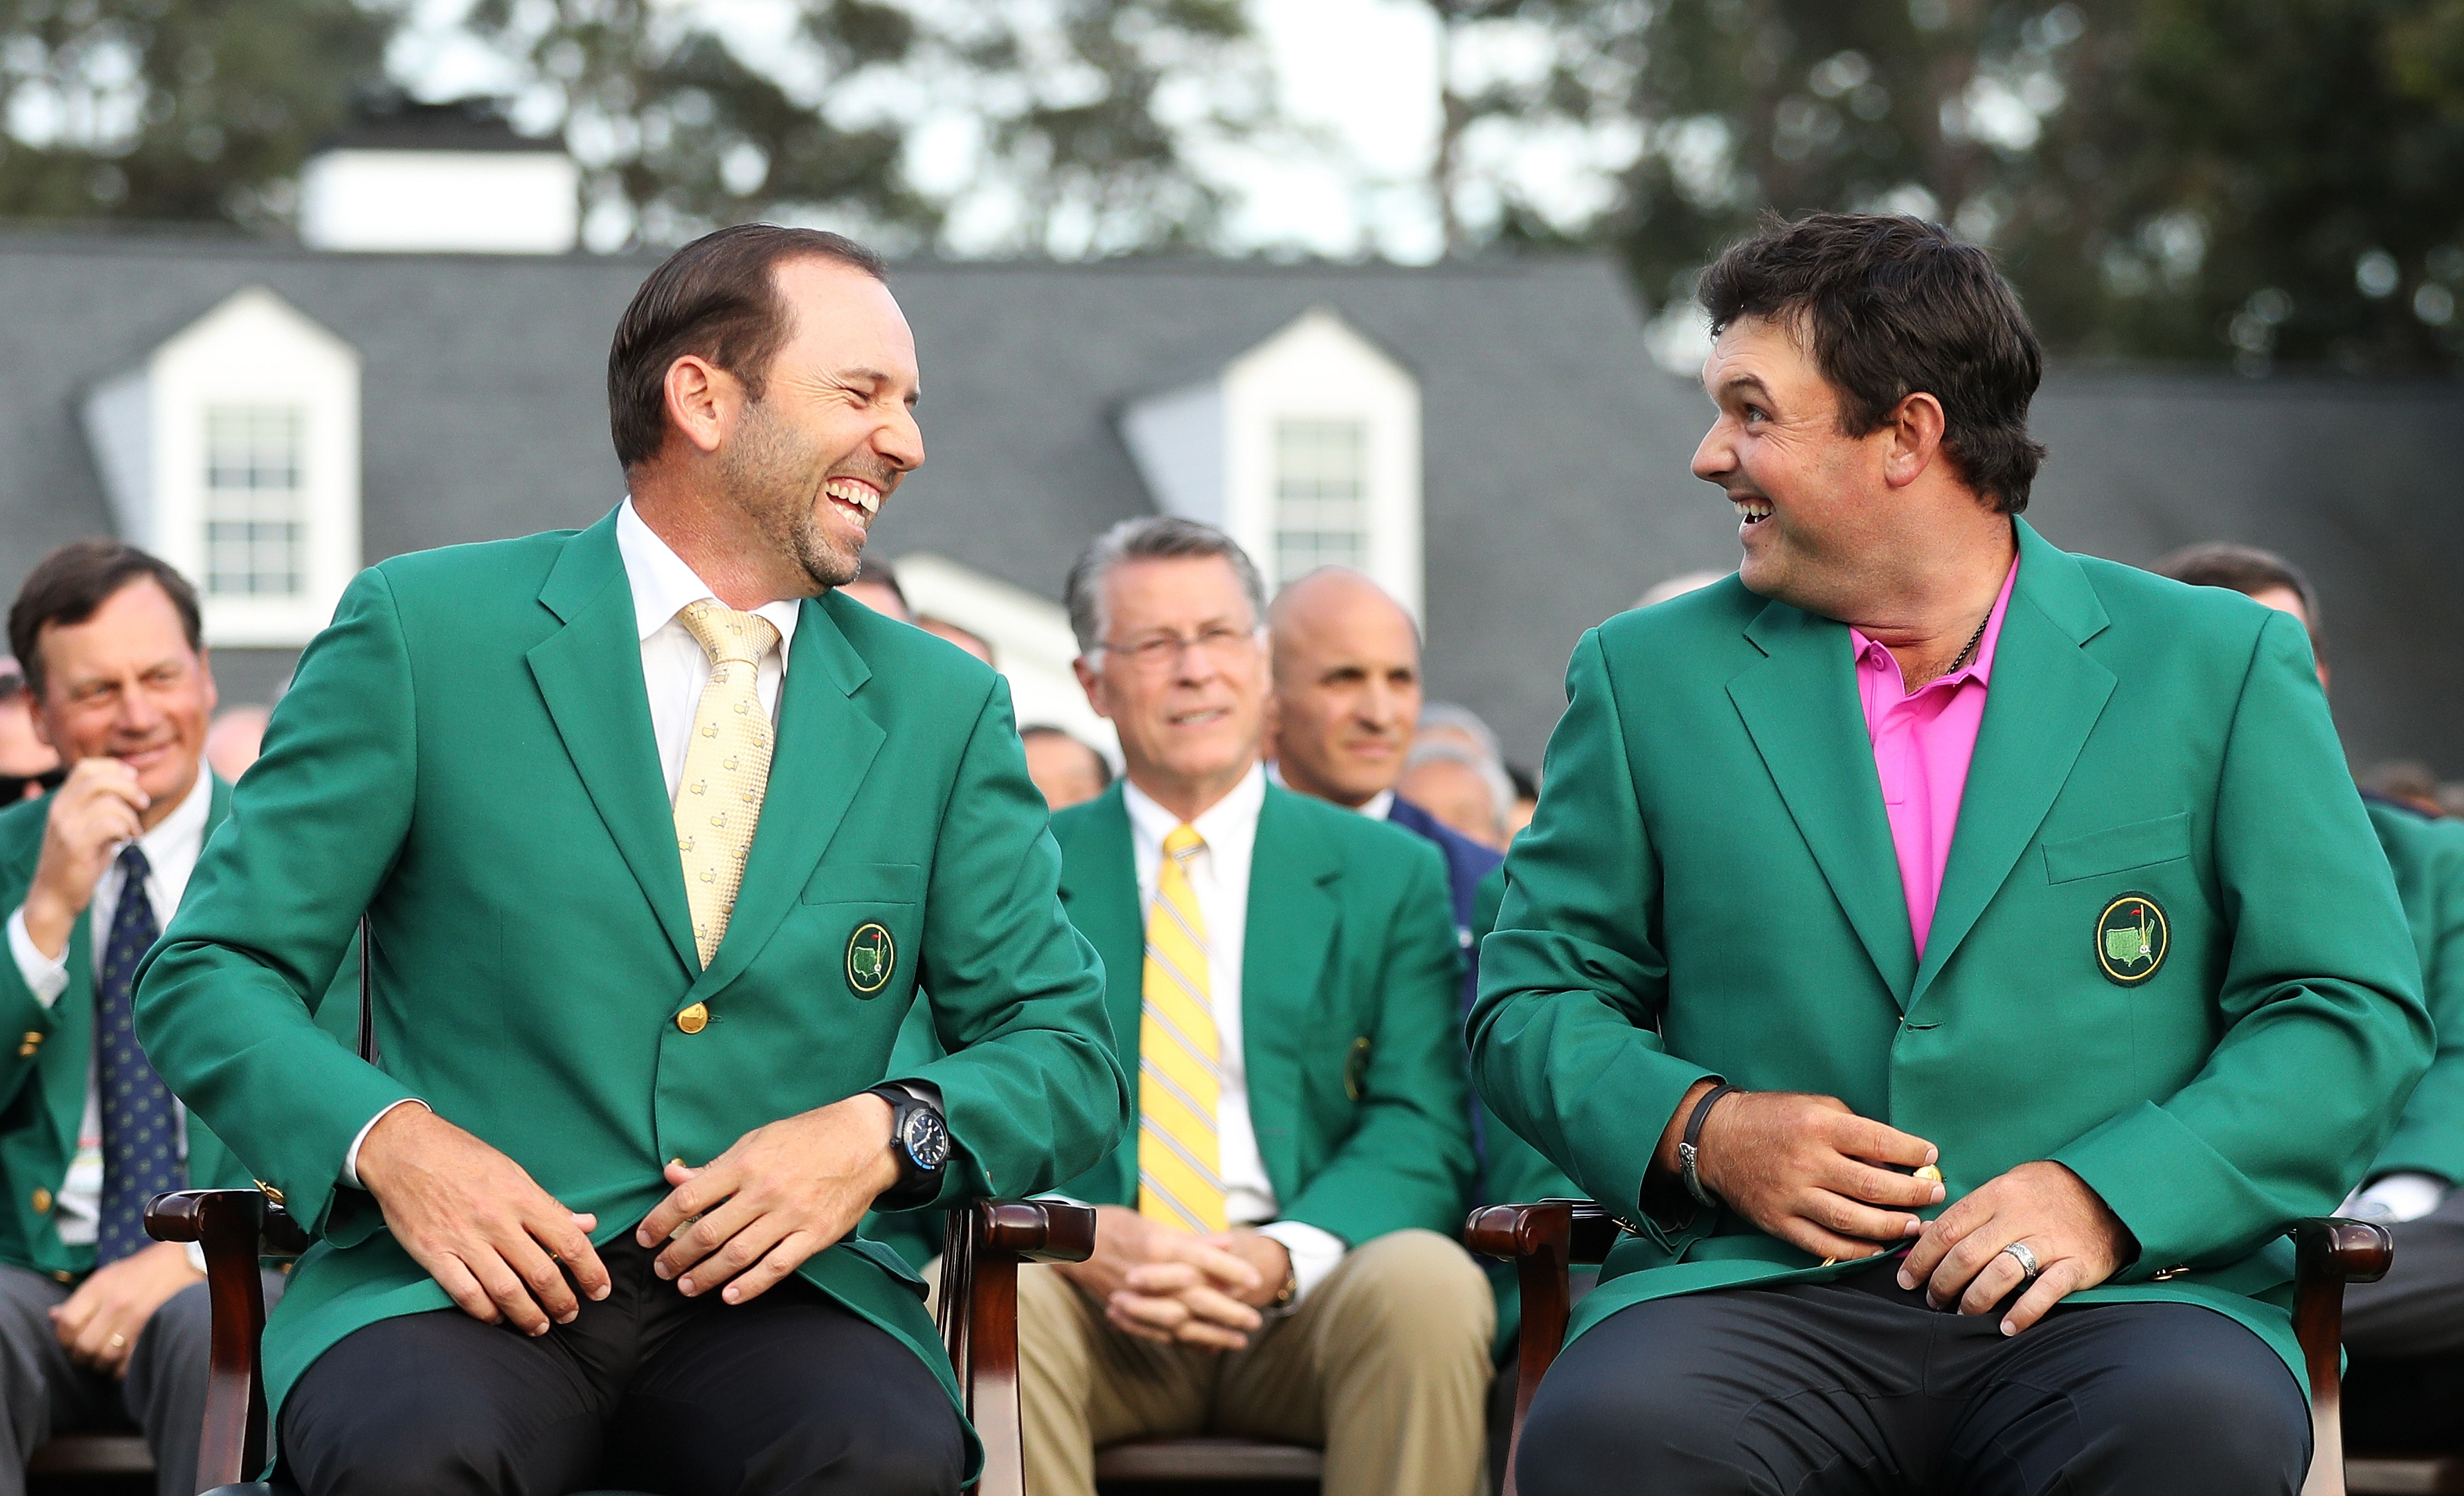 Man gets married then wins $1 million in Masters fantasy game | GolfMagic